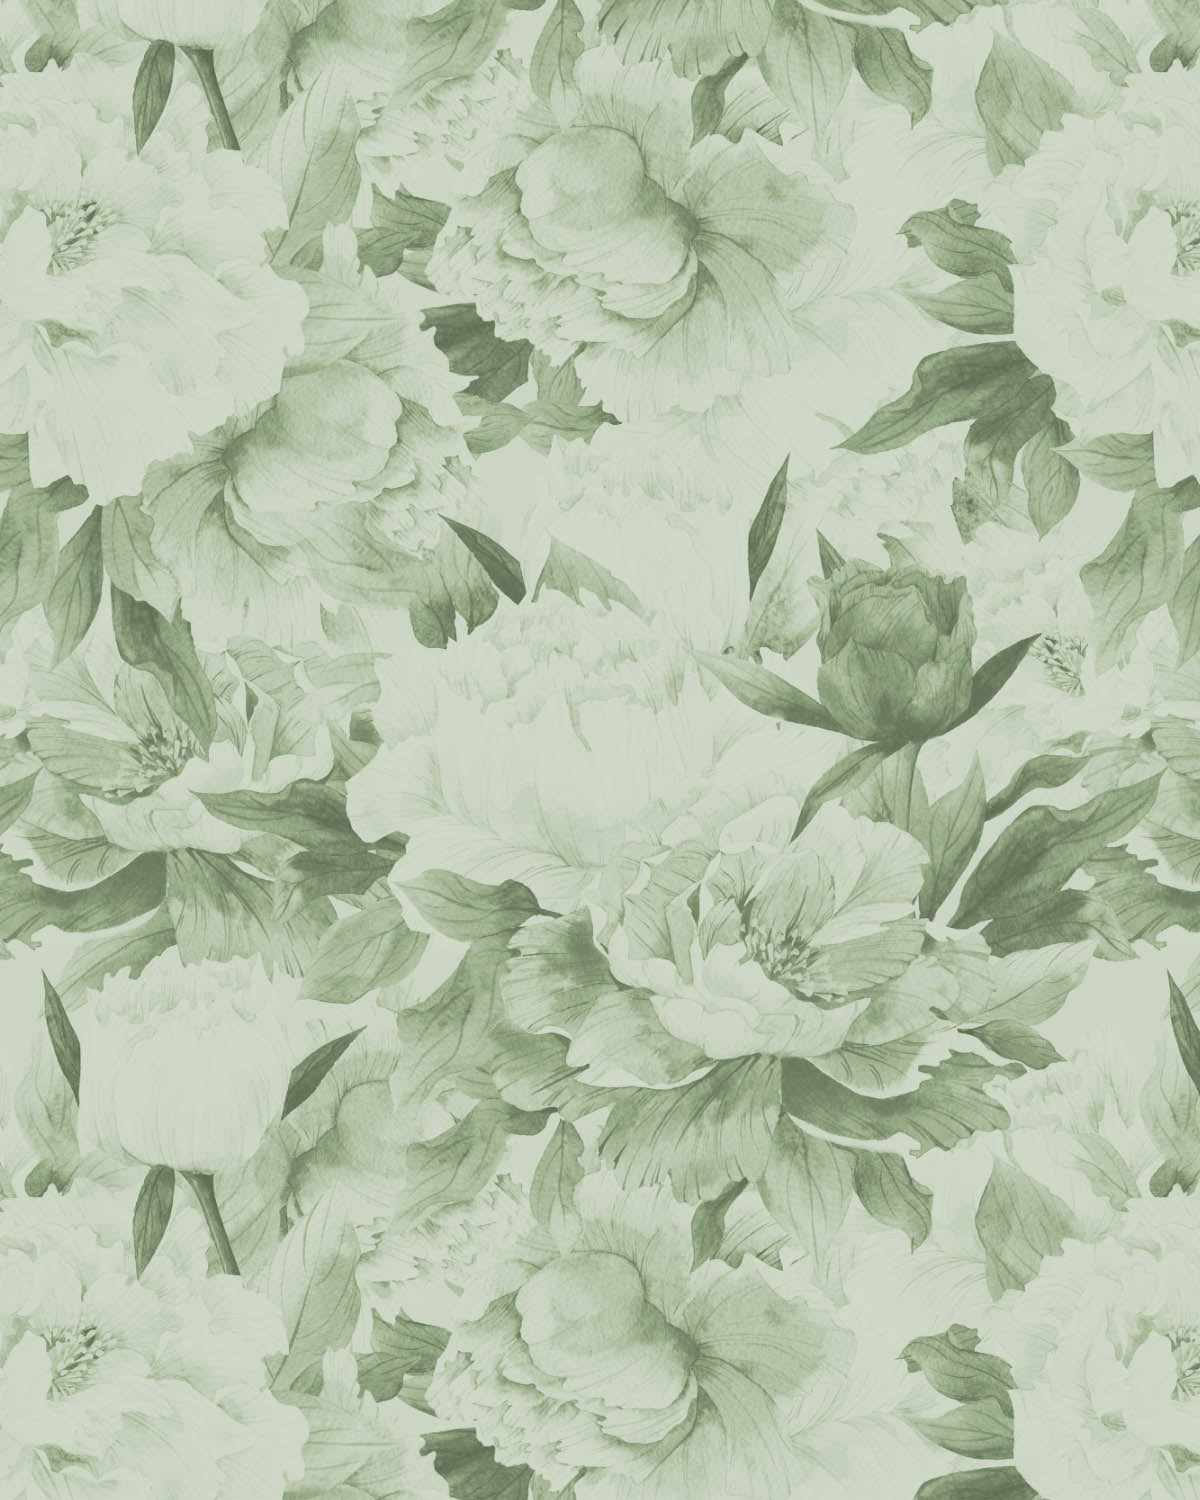 100+] Green Pattern Wallpapers | Wallpapers.com